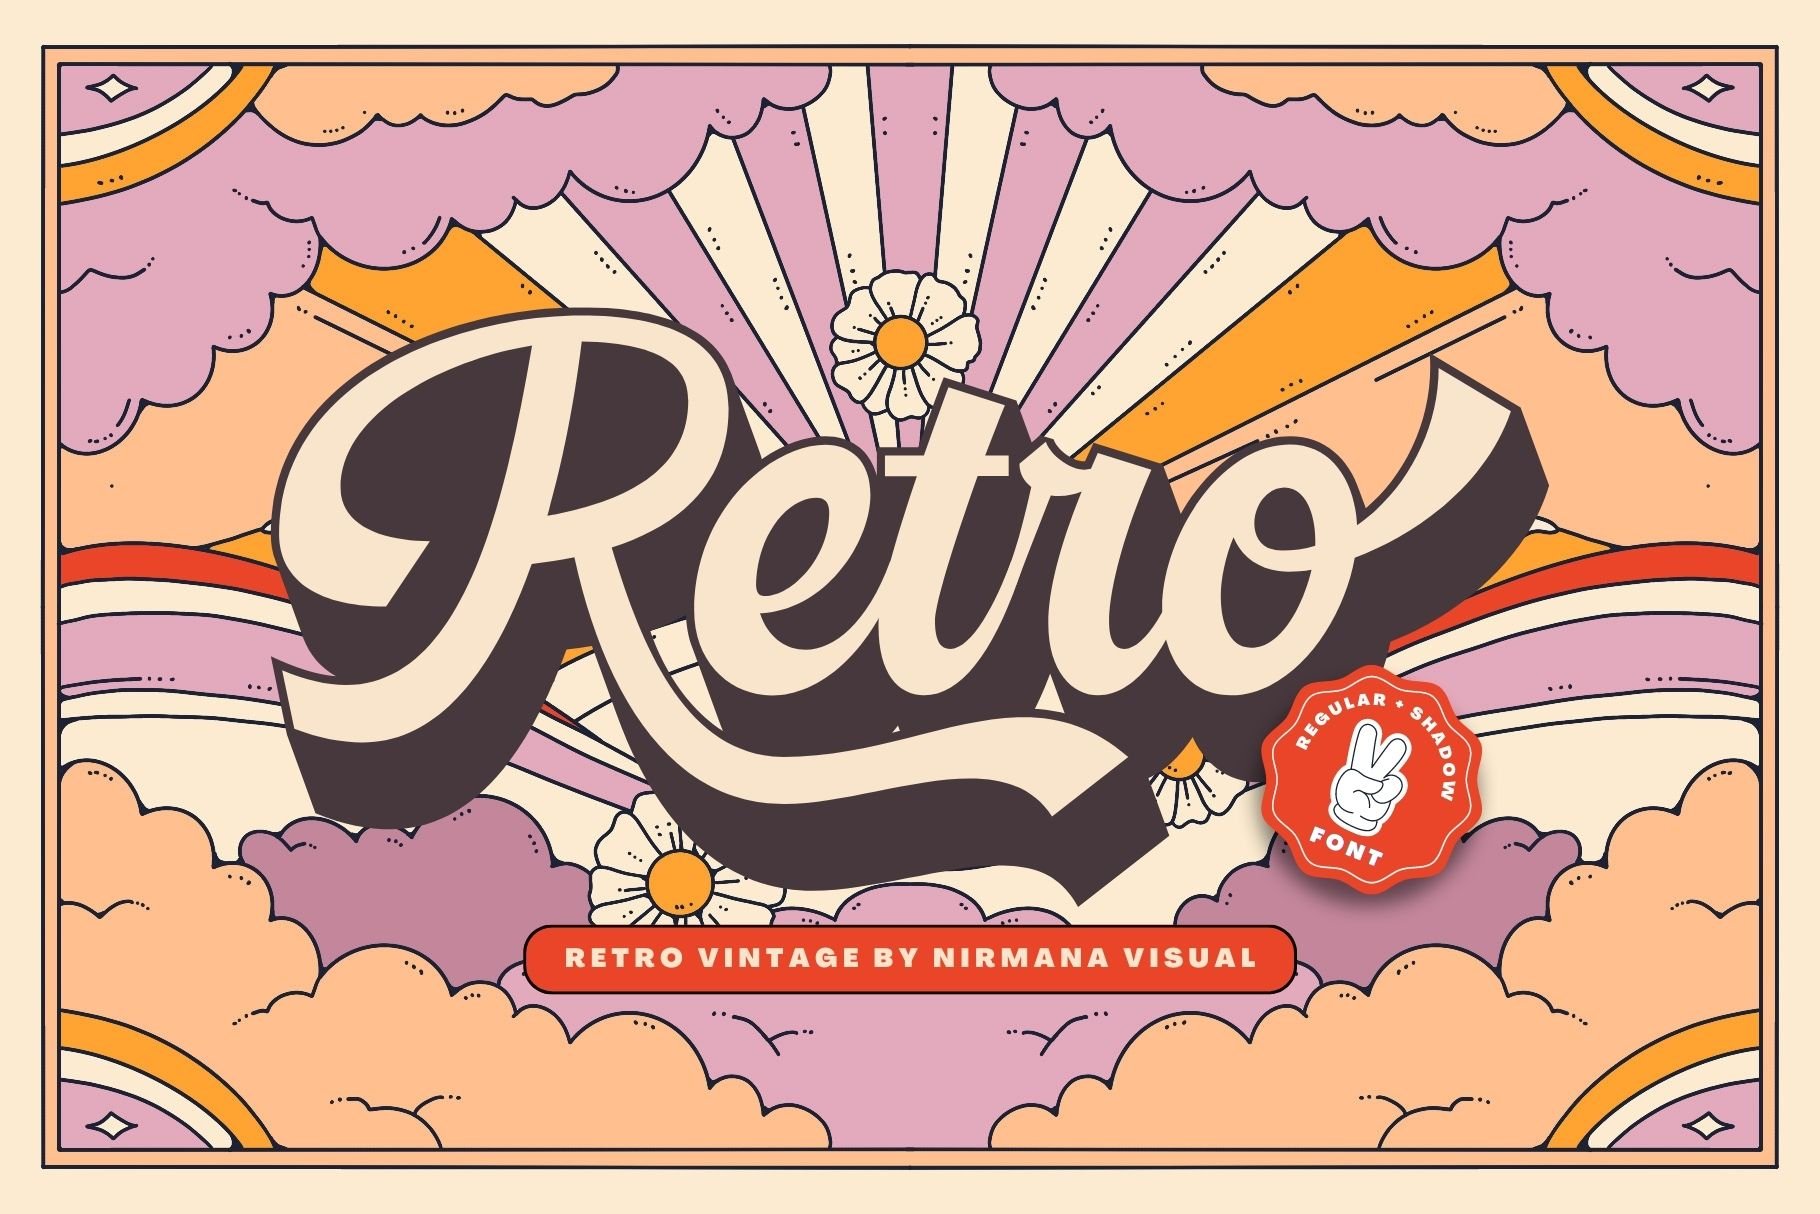 Retro Vintage - Groovy font cover image.